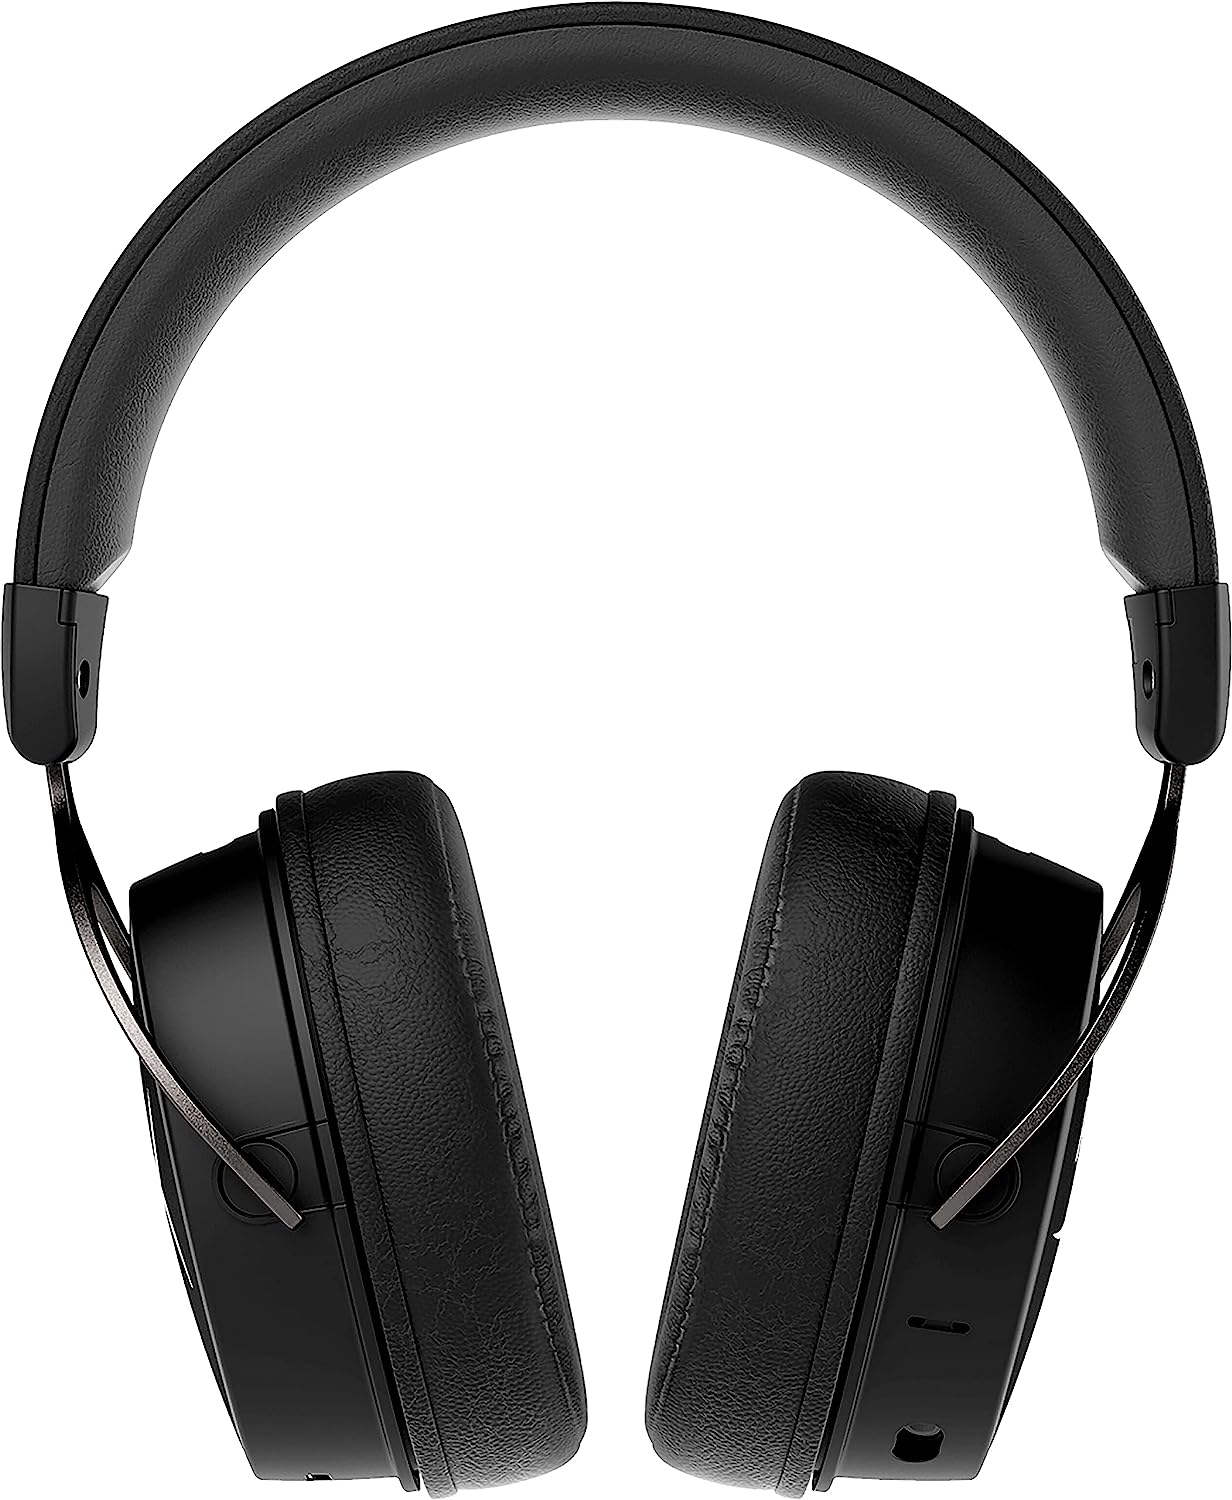 Wireless Headset No Mic - How To Choose The Best